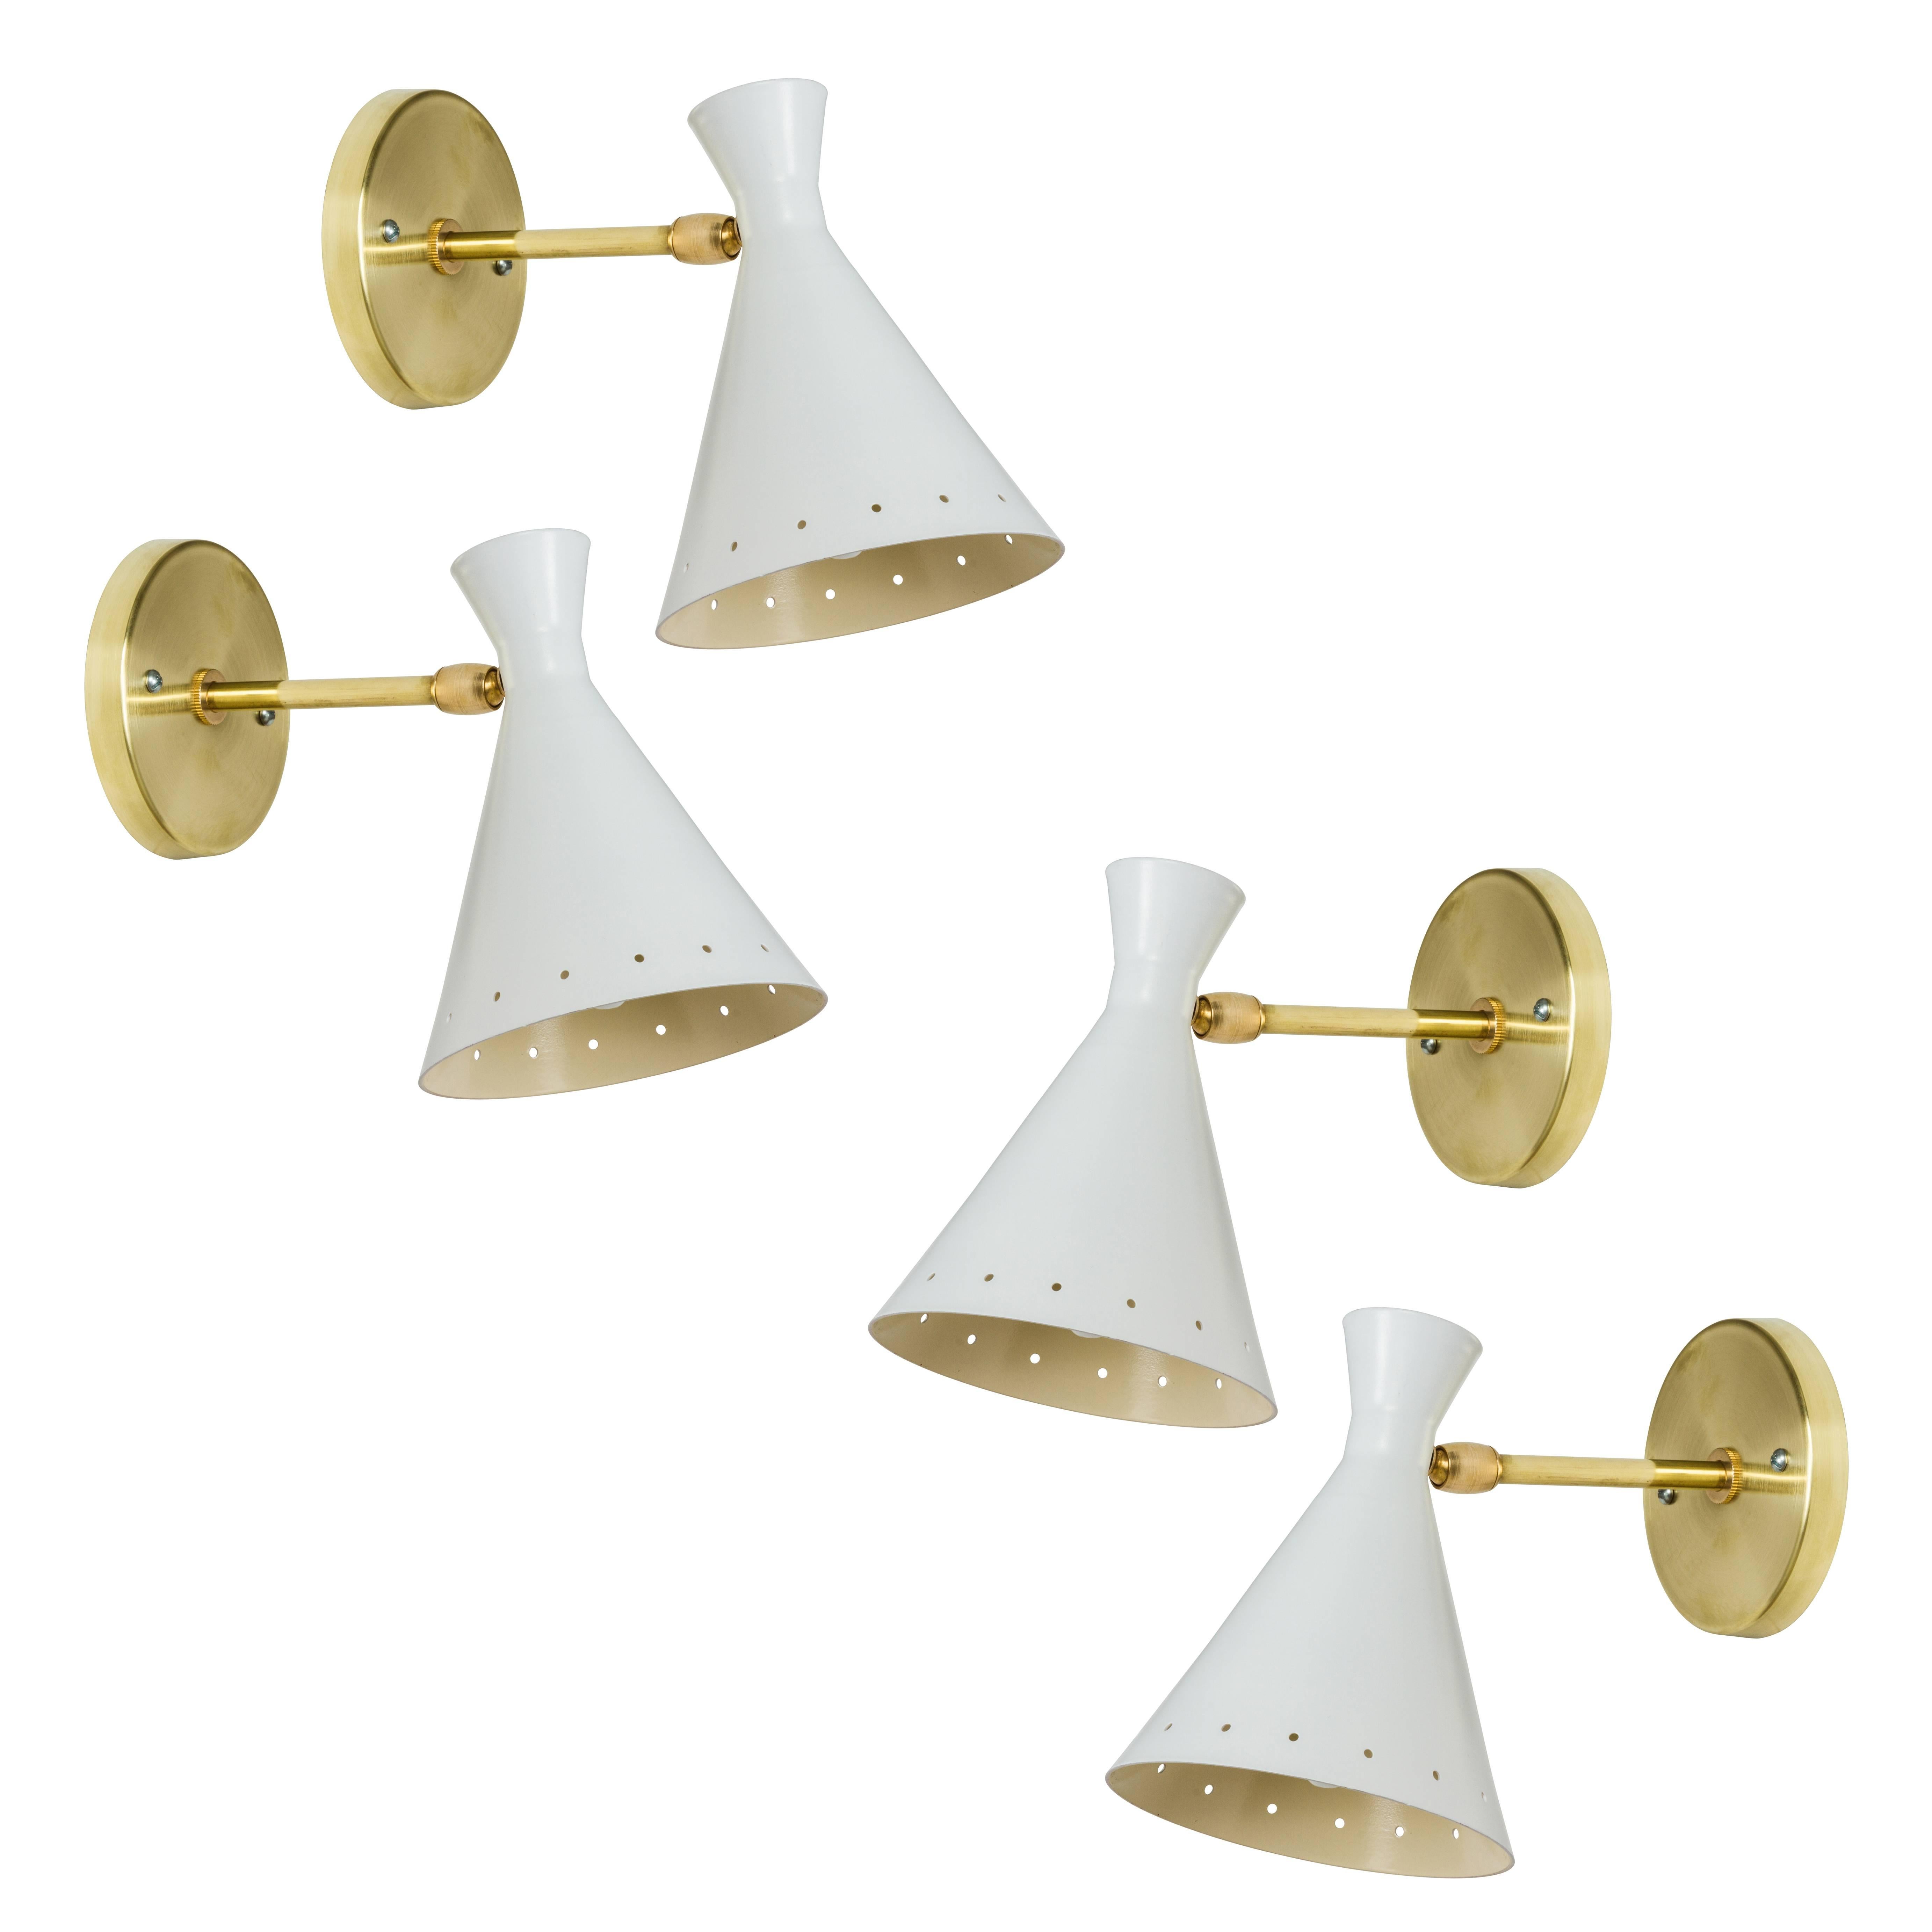 1950s Petite Italian sconces attributed to Stilnovo. Executed in brass, white painted metal and custom brass back plate for US.
Sold as a single set or in pairs.